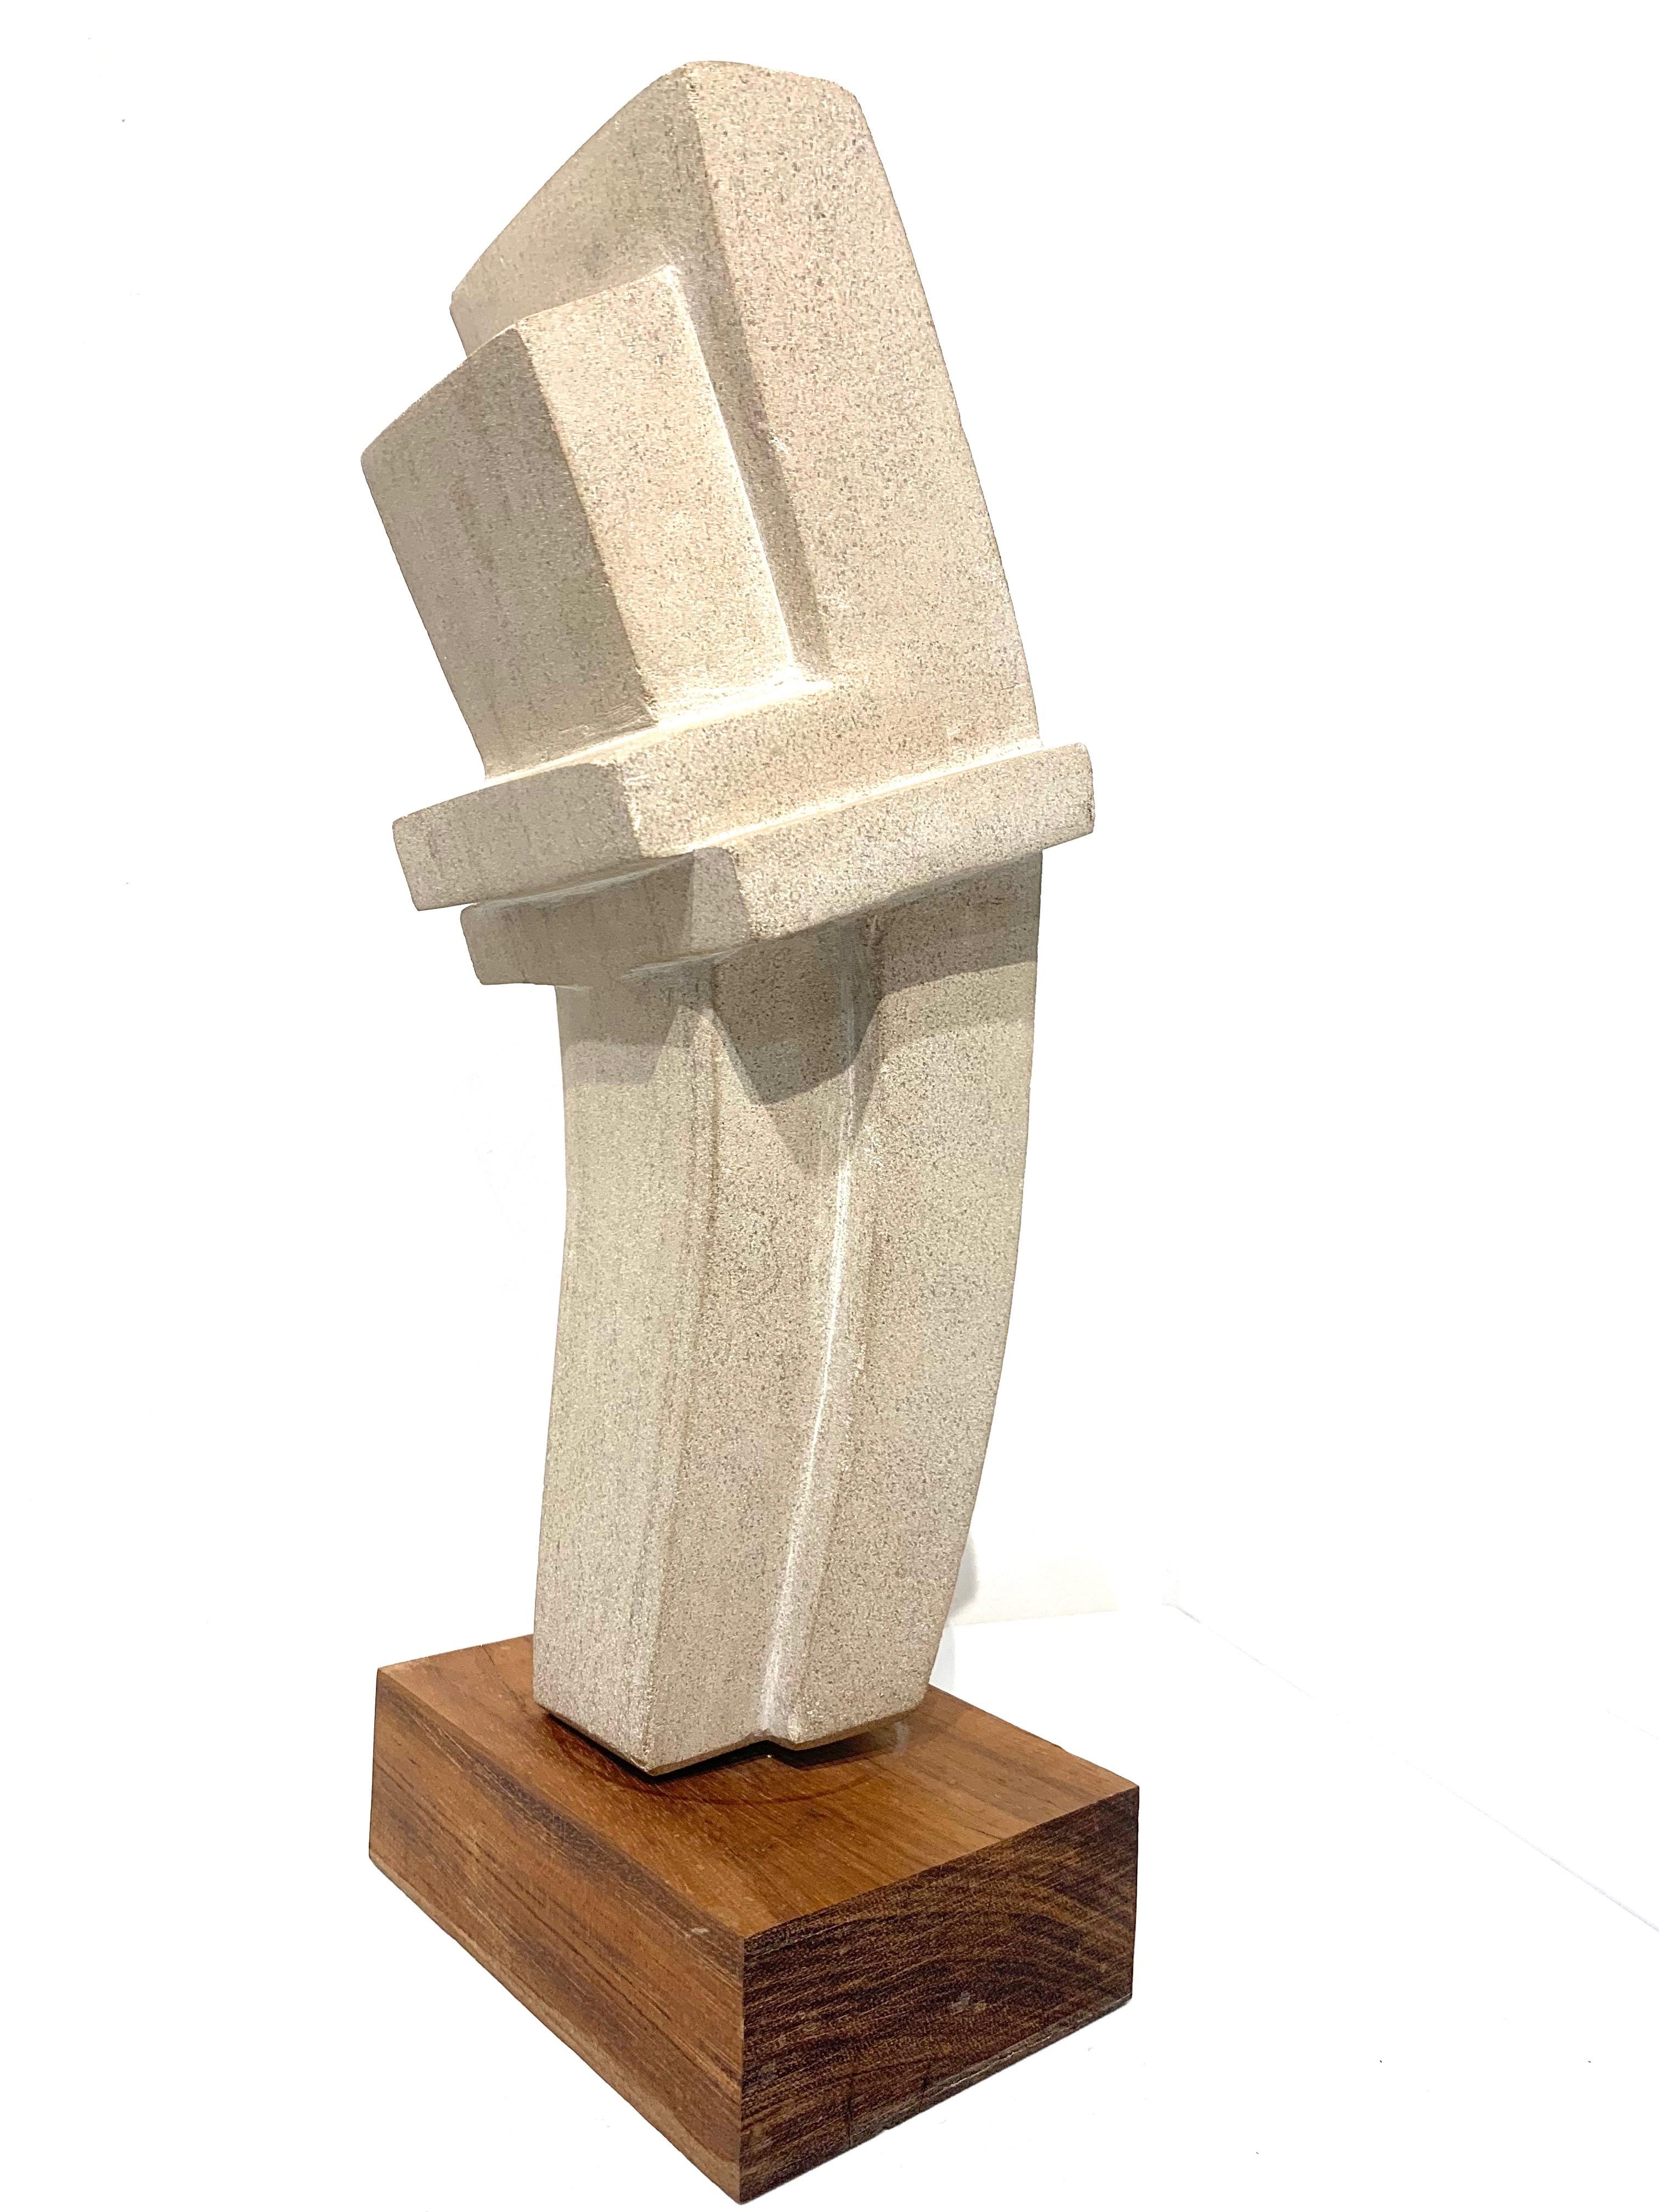 Cast Concrete Sculpture by Bakst - Brown Abstract Sculpture by Unknown